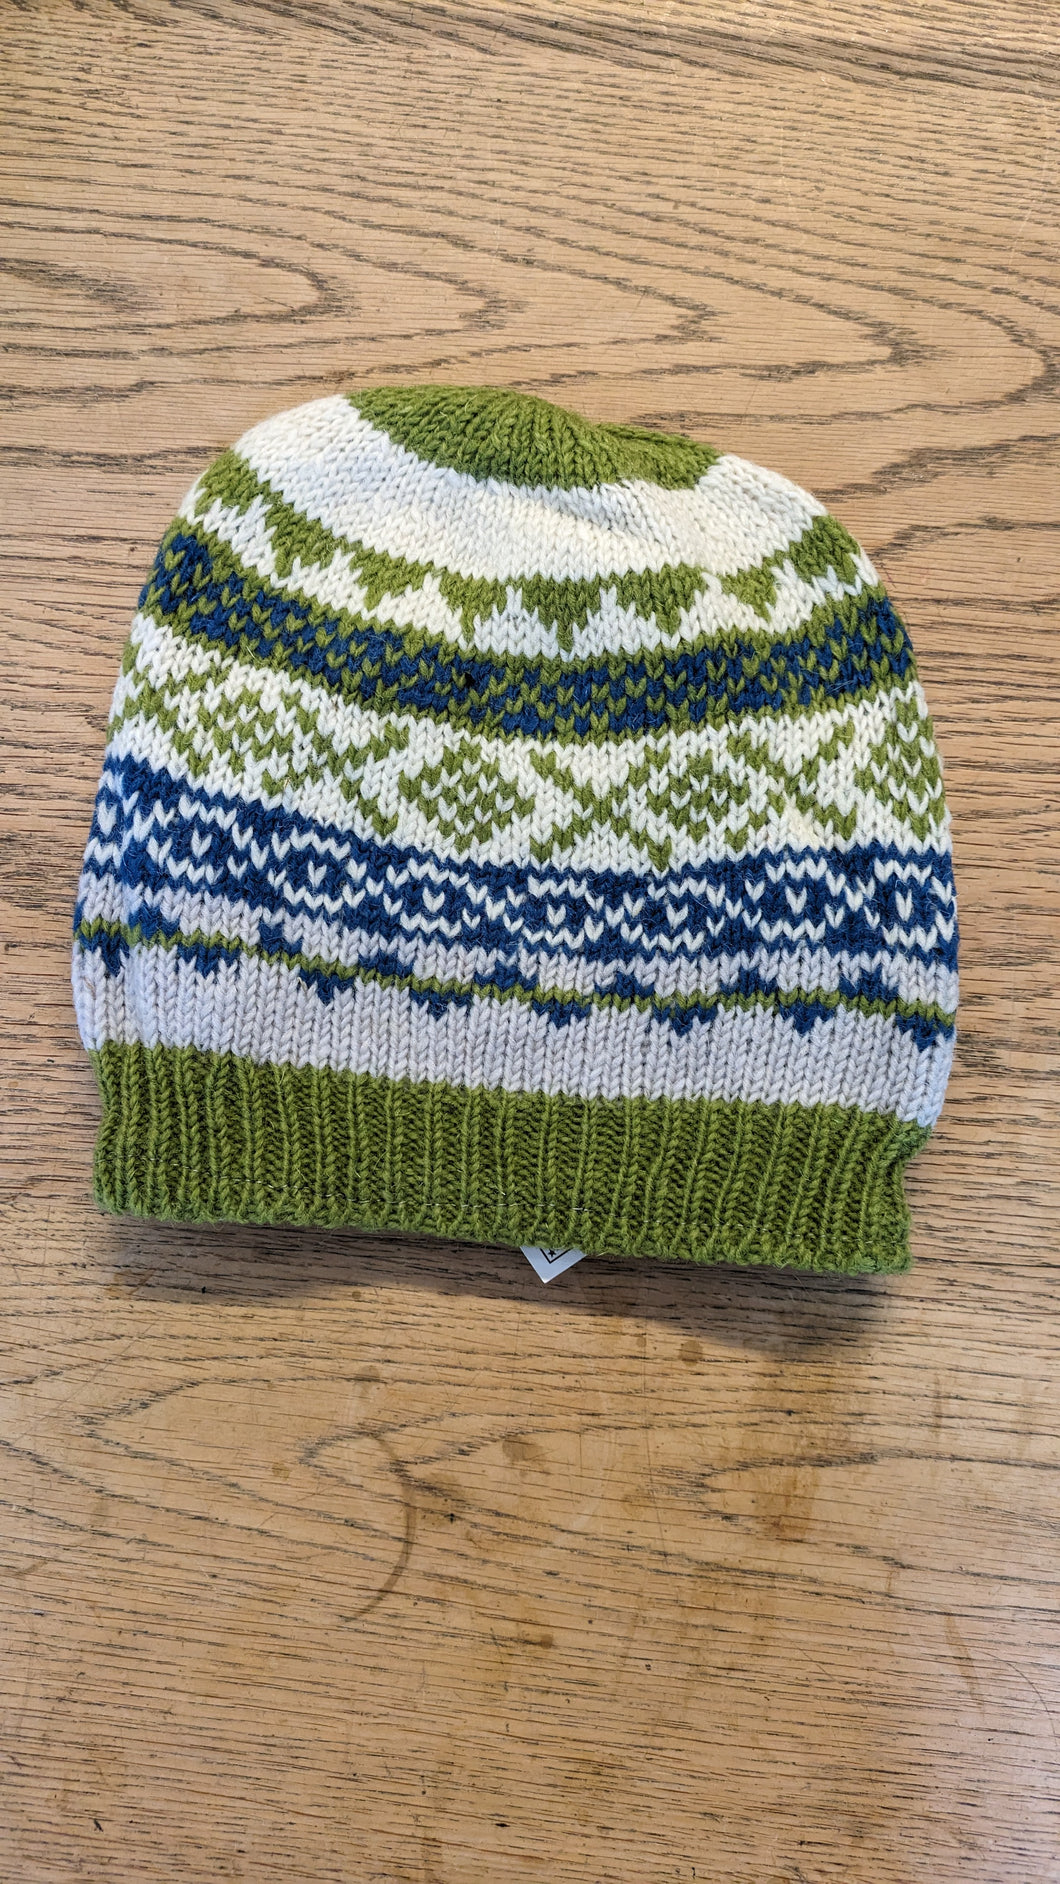 Knitted Patterned Hat